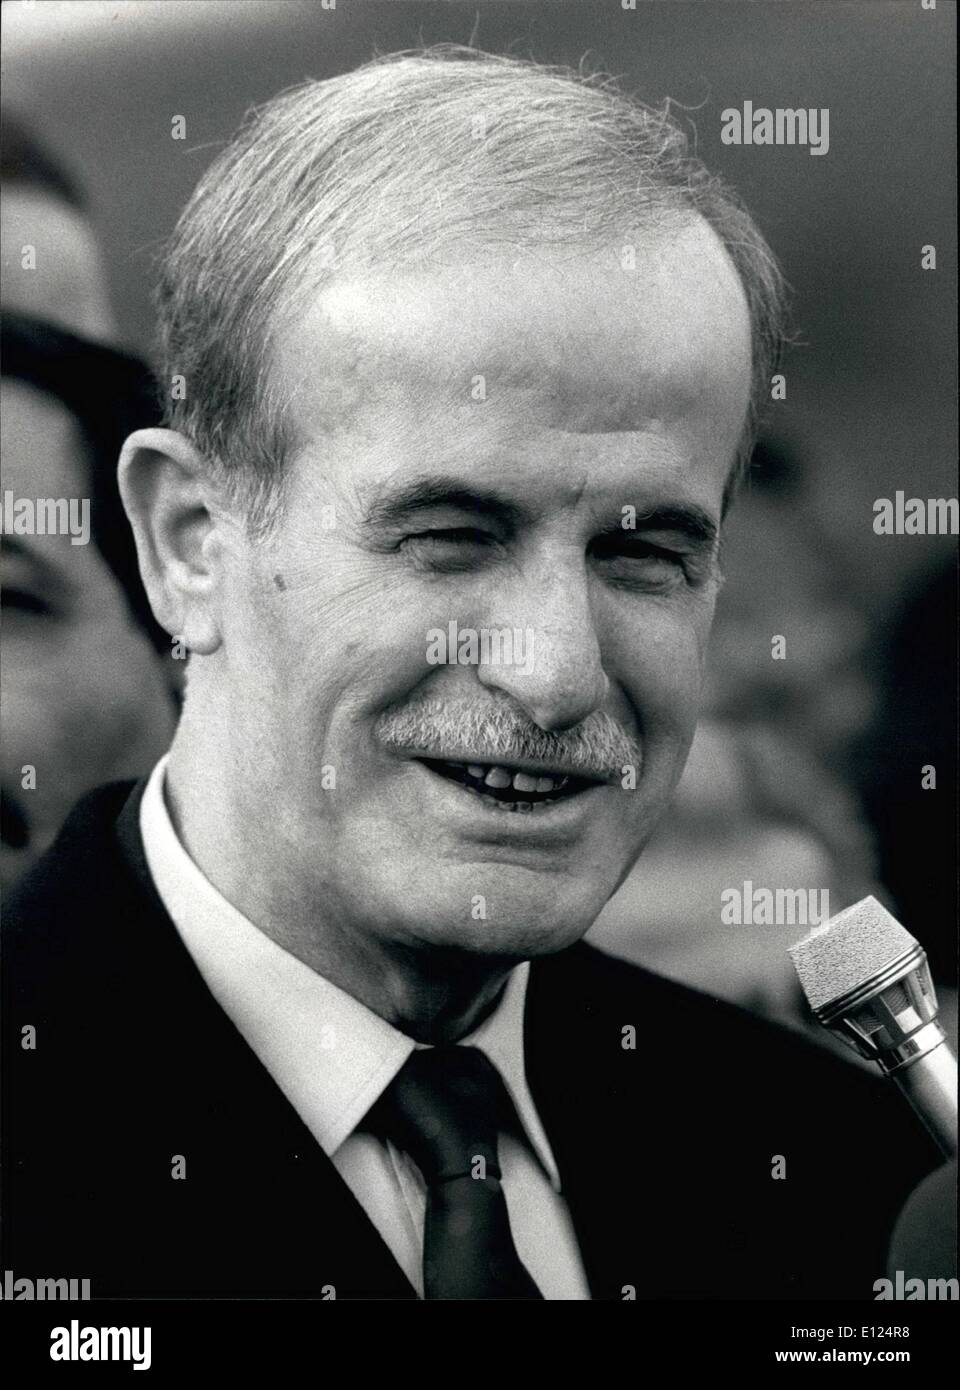 Nov. 11, 1990 - For Your Files: Hafes El Assad: Syrian President Hafes el Assad at a press conference after a meeting with US-President George Bush in Geneva, Nov. 23. Stock Photo